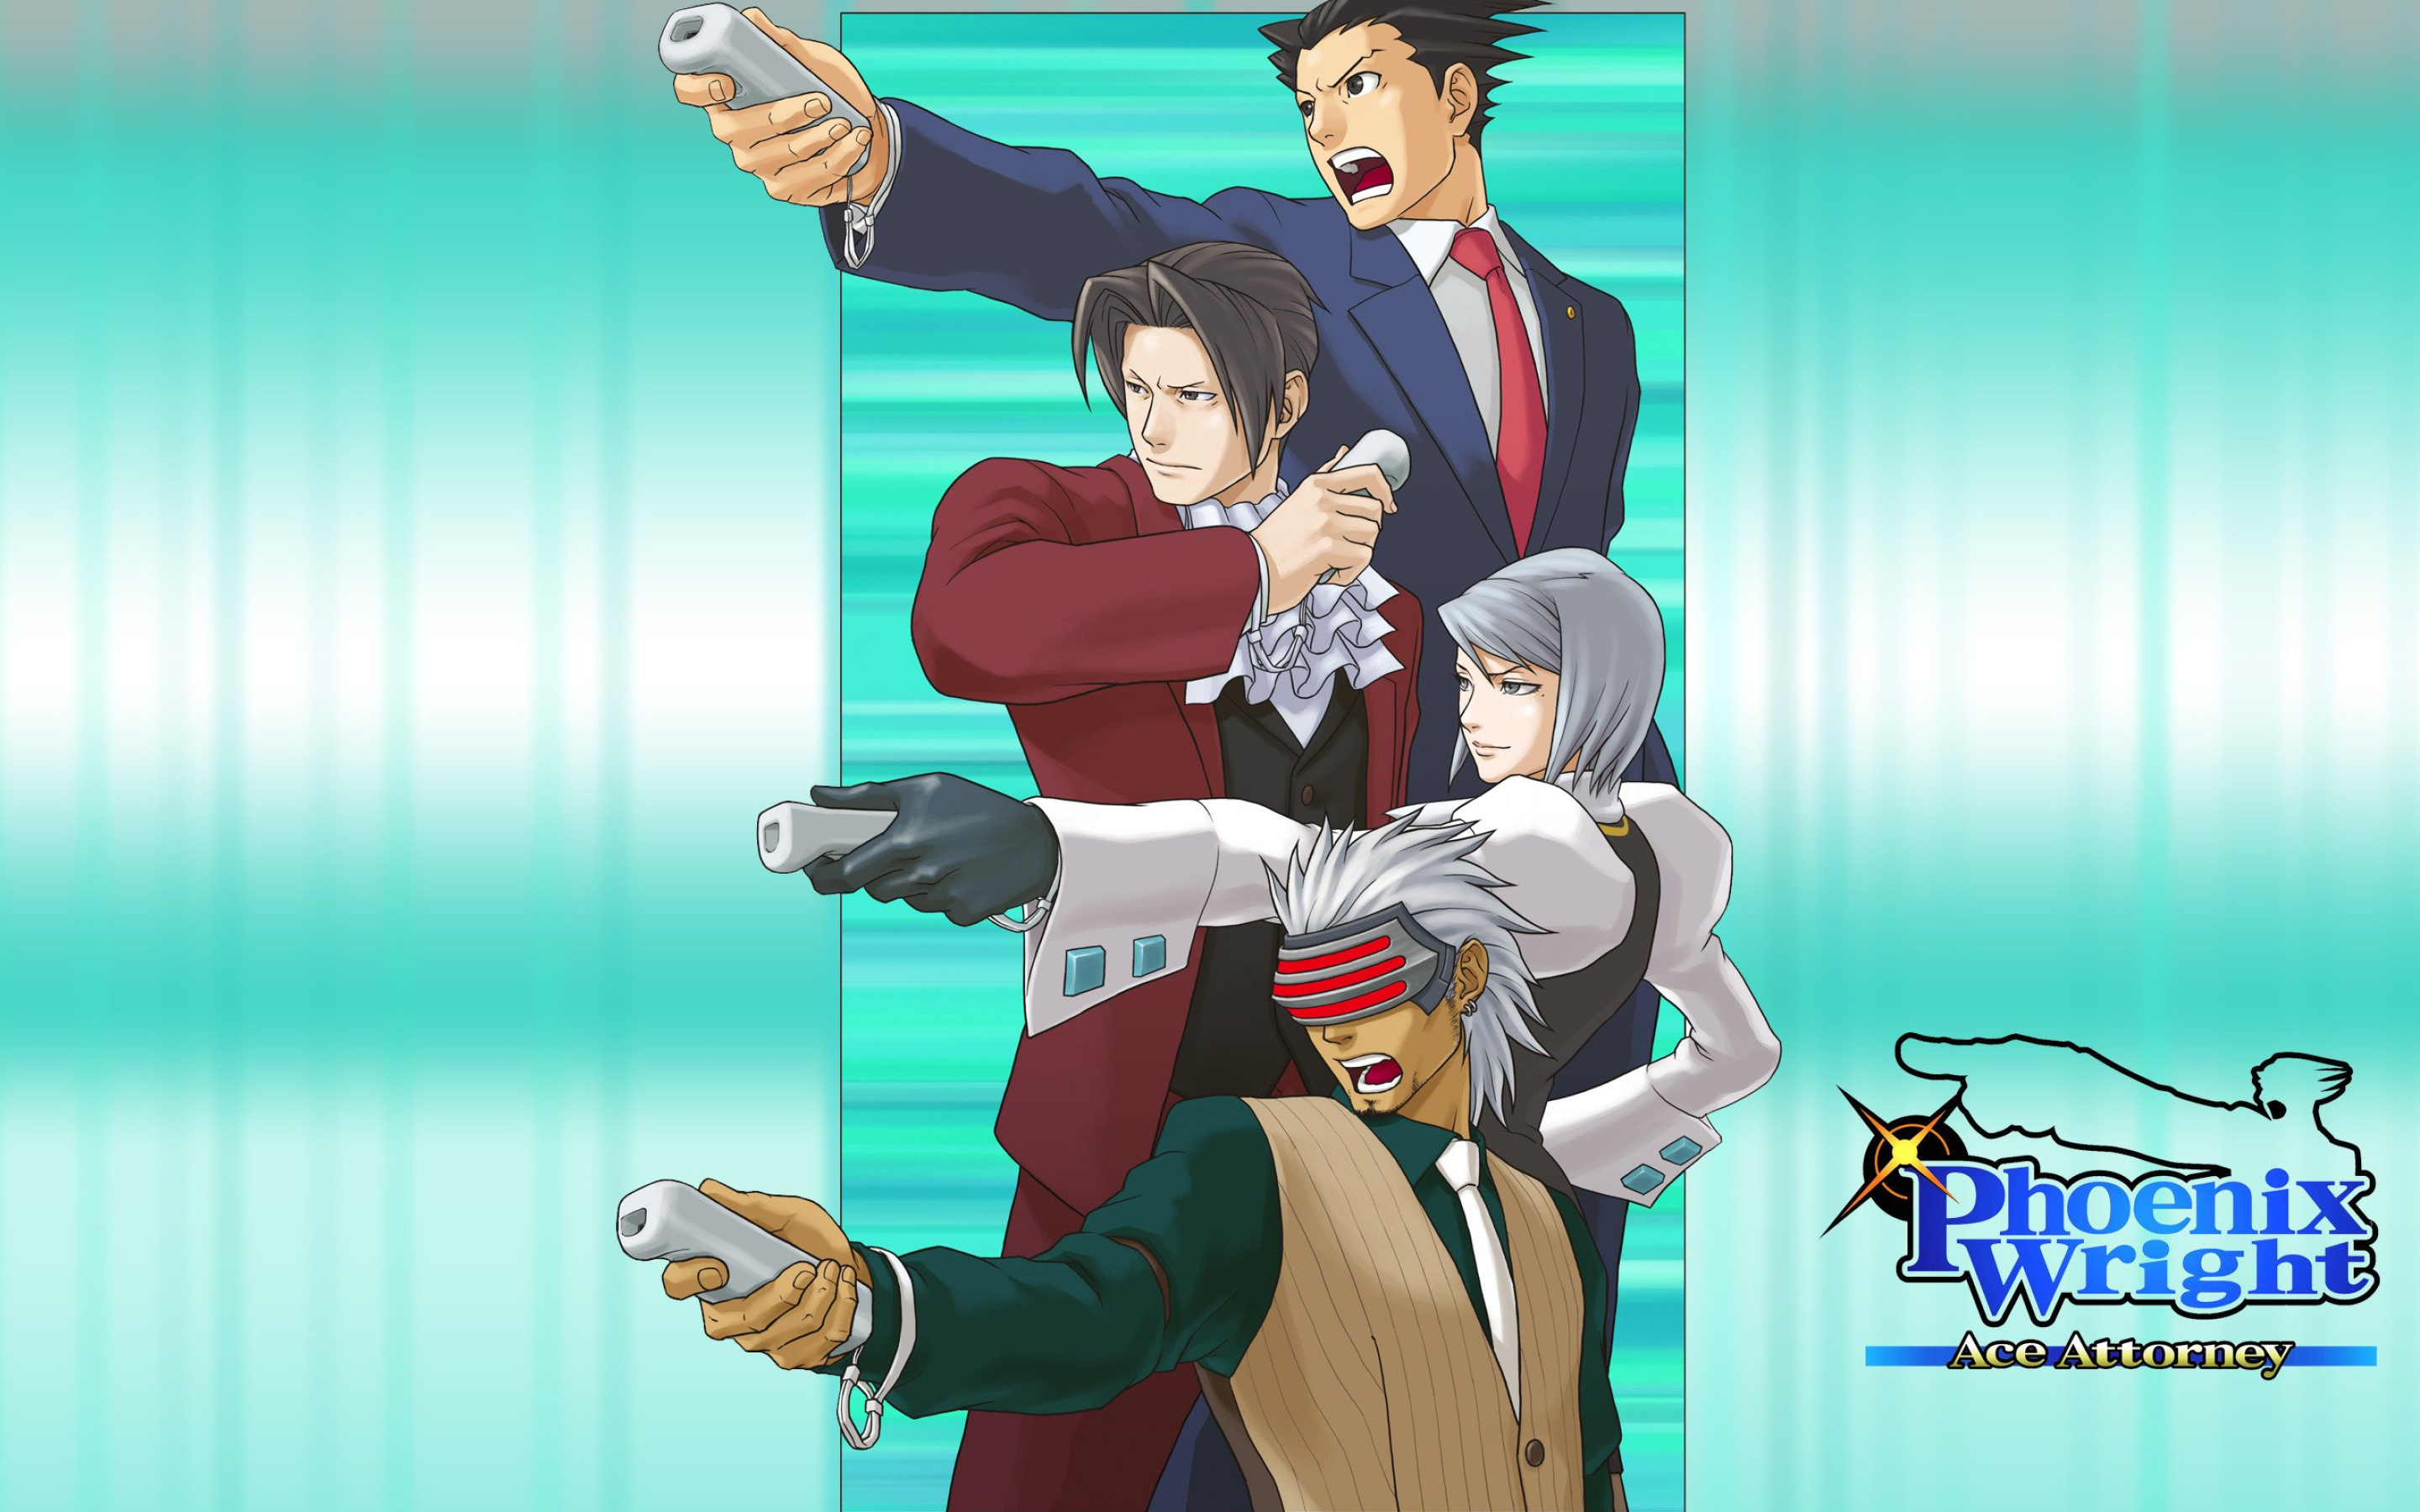 Phoenix wright ace attorney wallpapers and backgrounds k hd dual screen